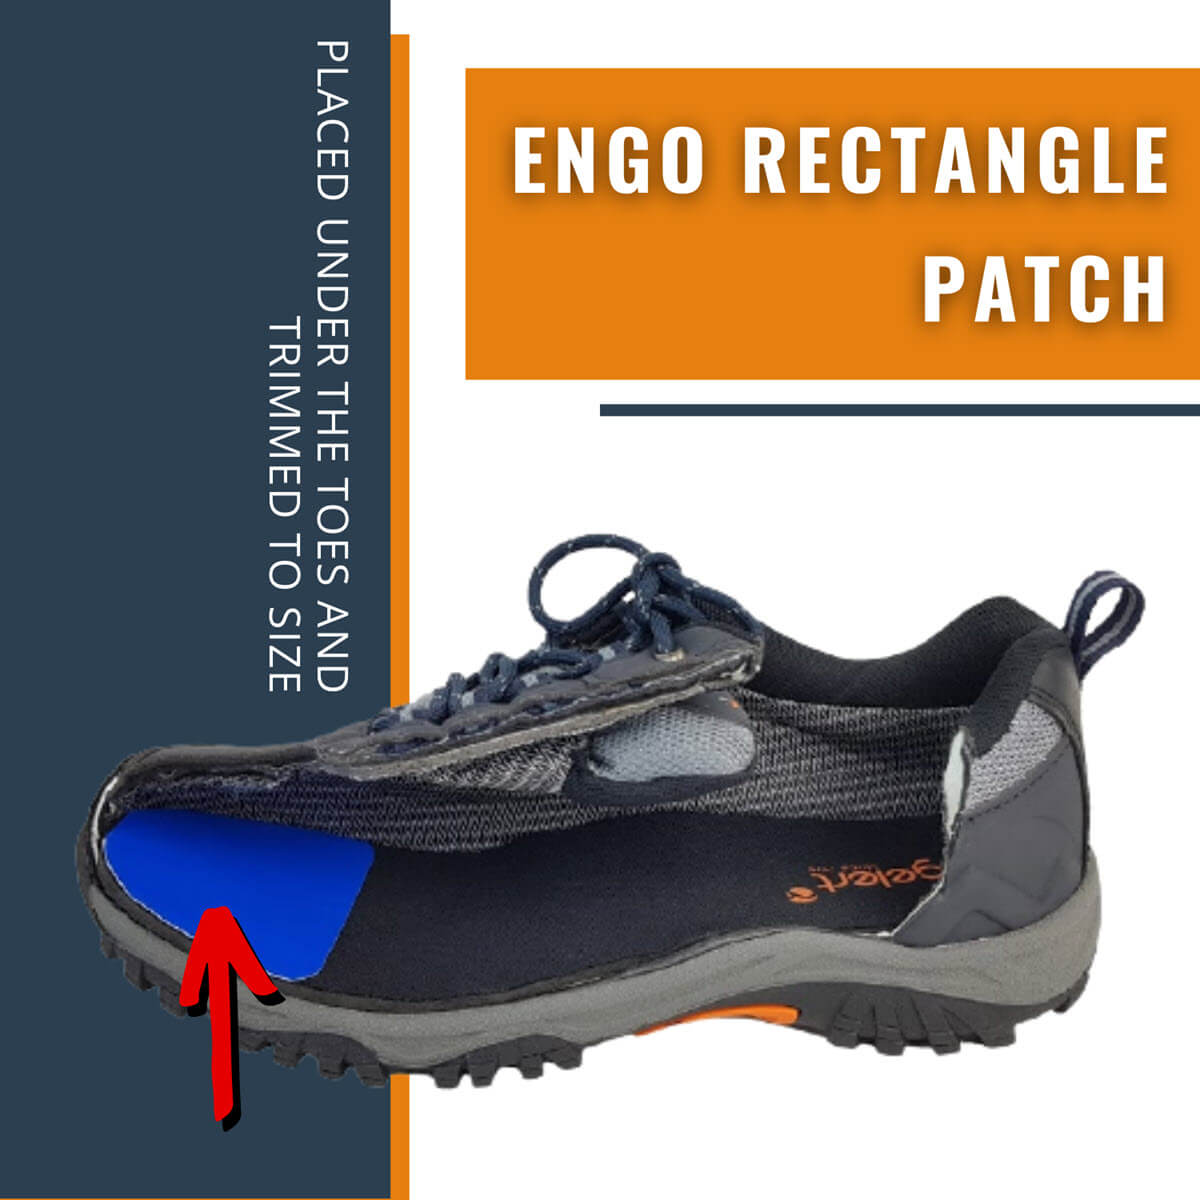 ENGO Blister Patches Rectangle Pack rectangle patch applied under the toes and trimmed to size side on